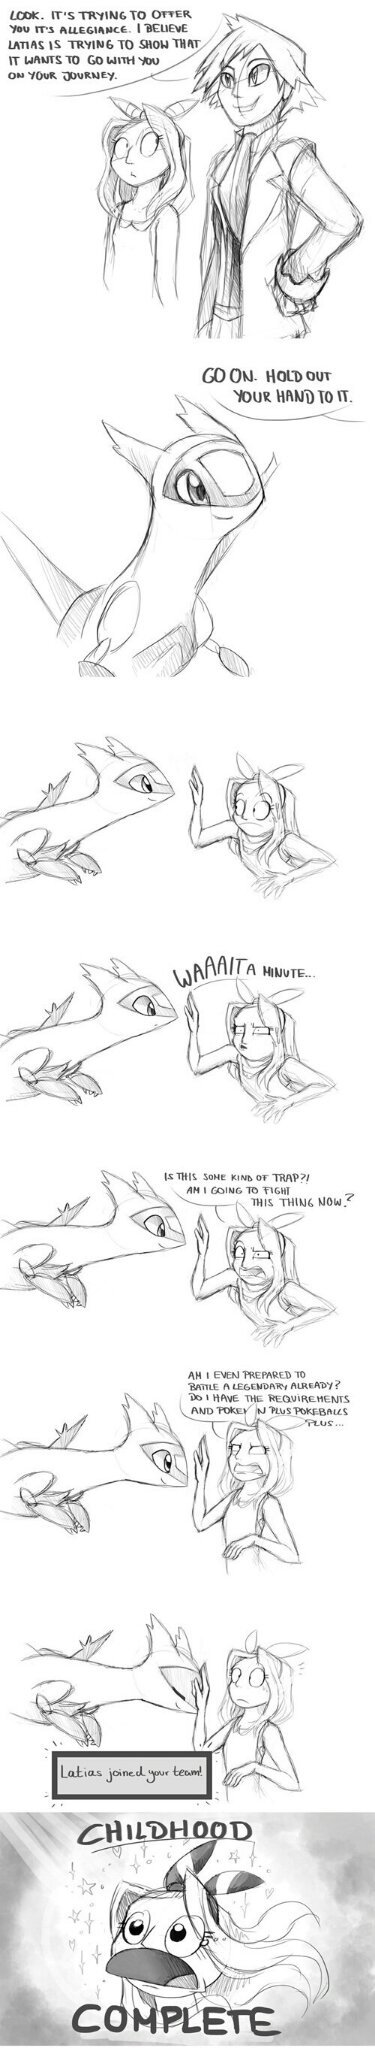 Latias is,and always will be,a cutie pie. - meme